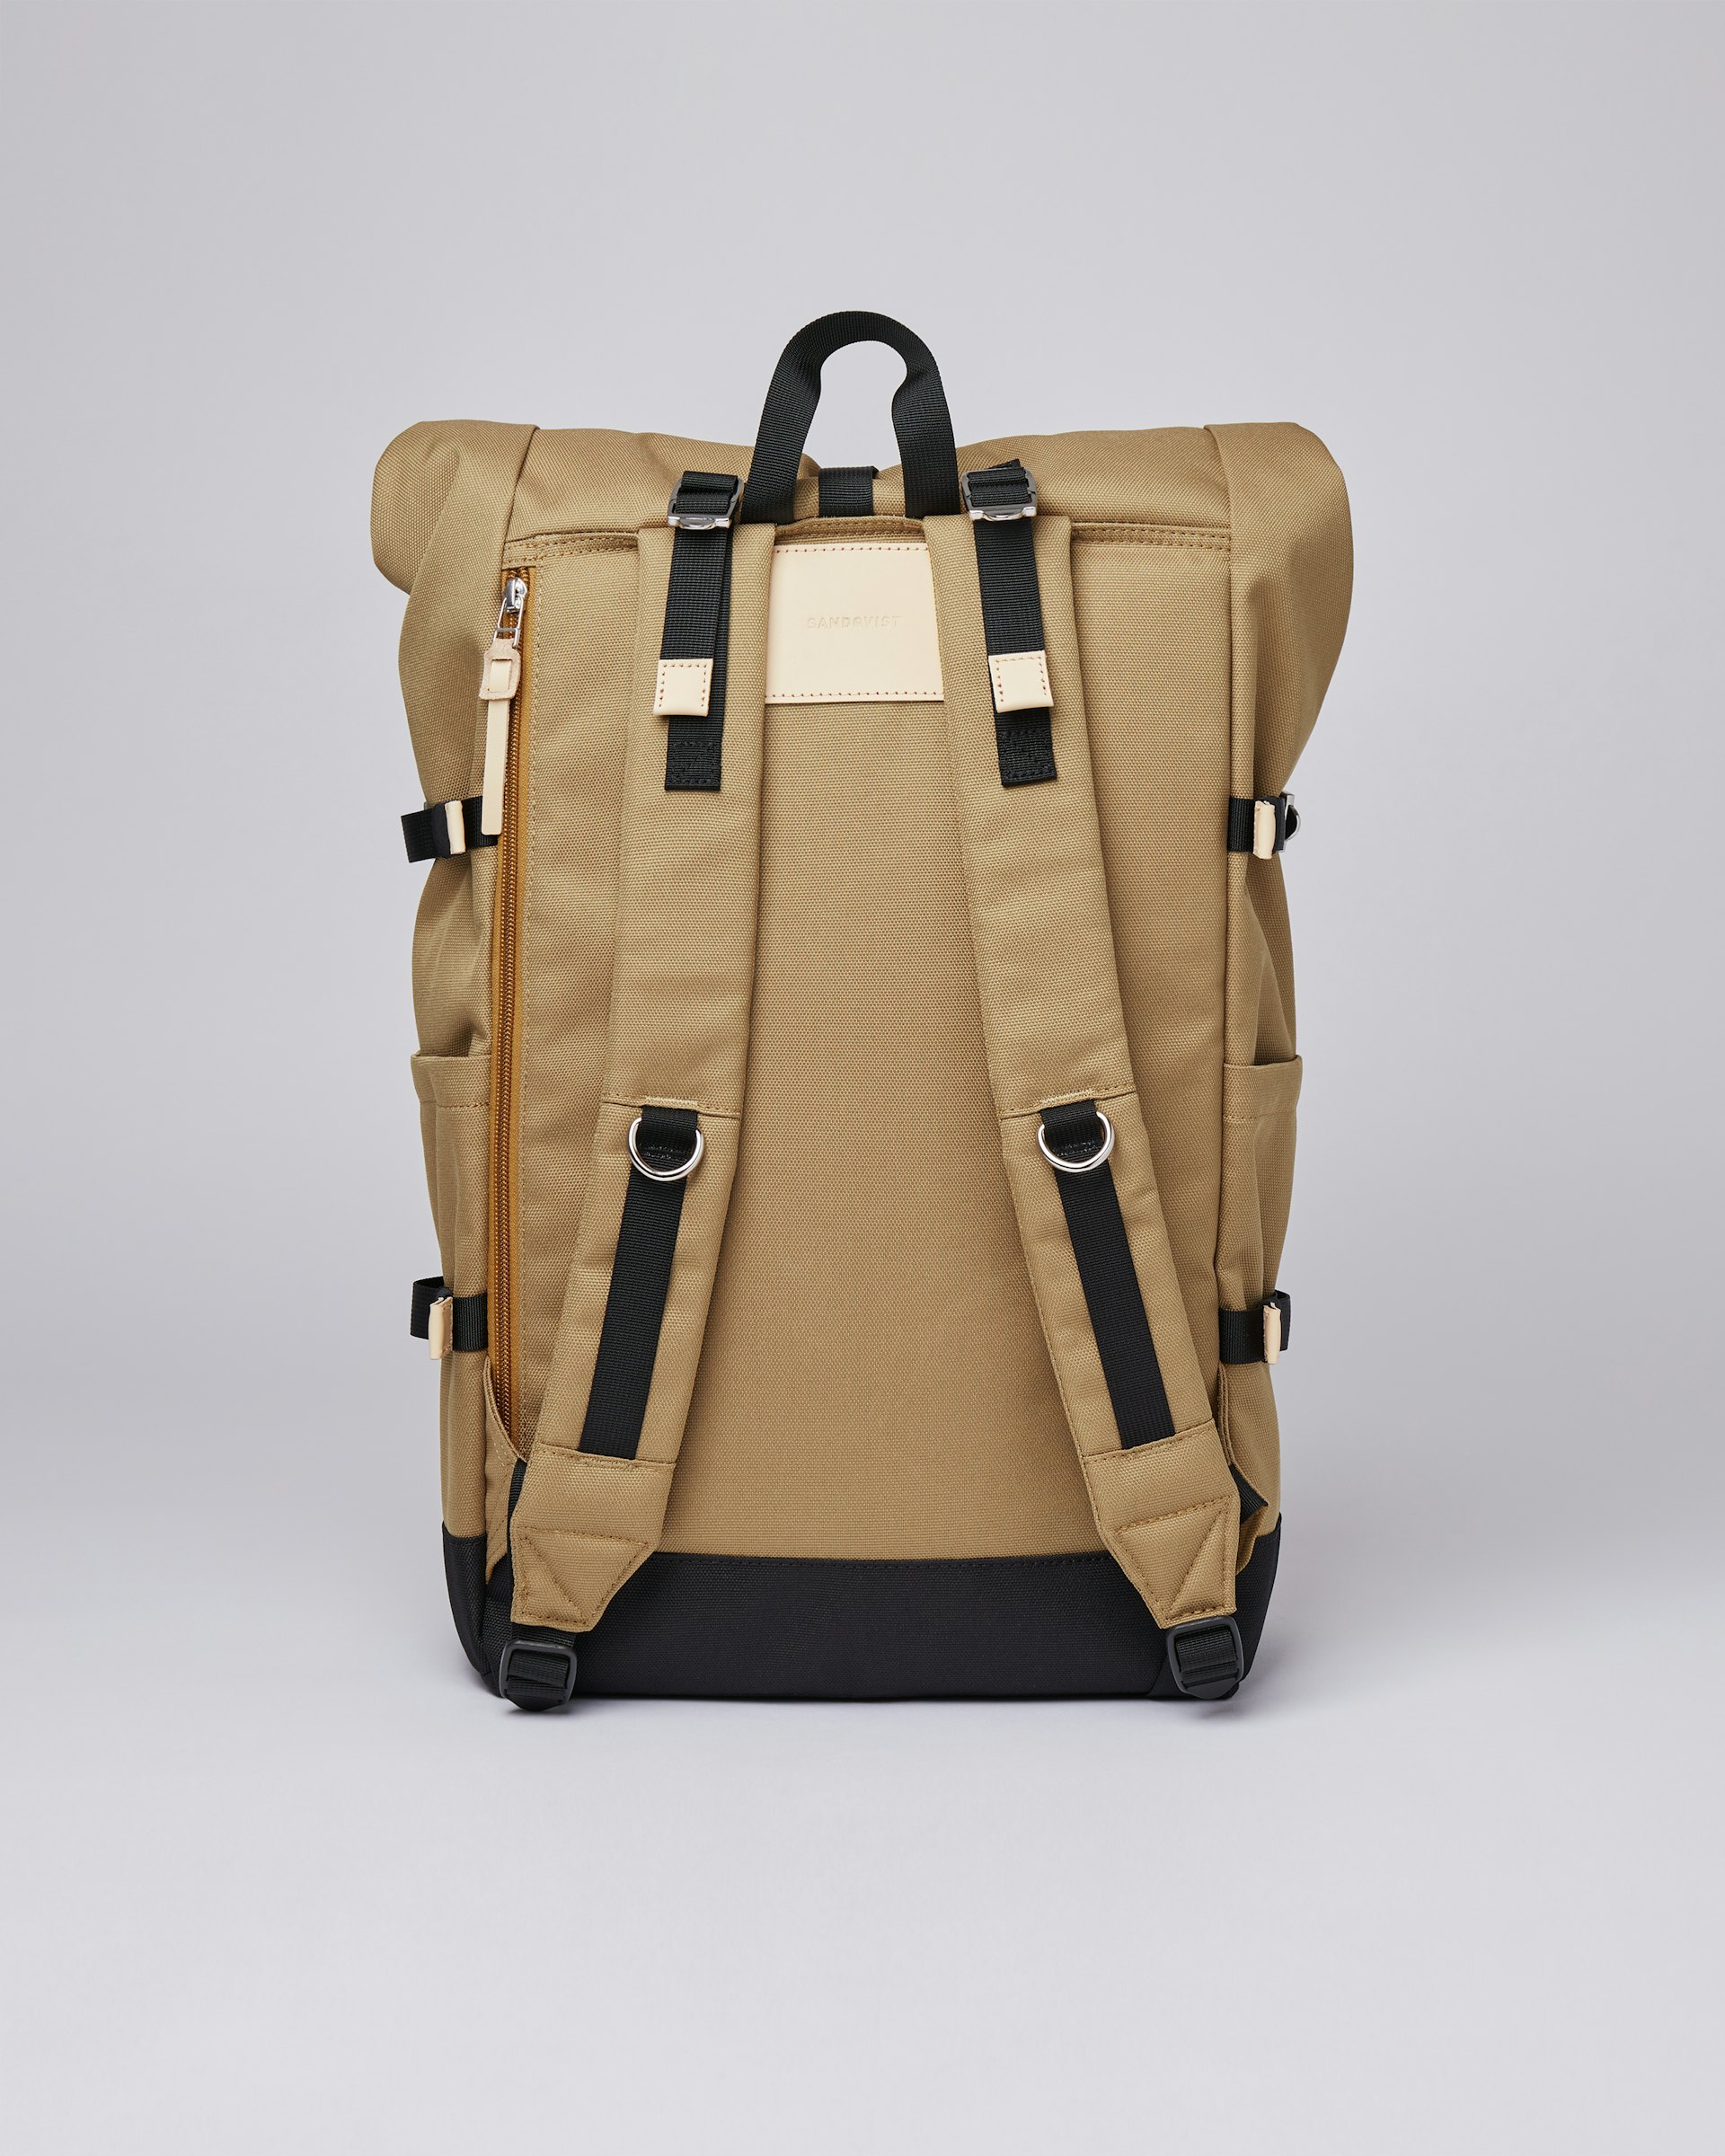 Bernt belongs to the category Backpacks and is in color bronze (3 of 7)